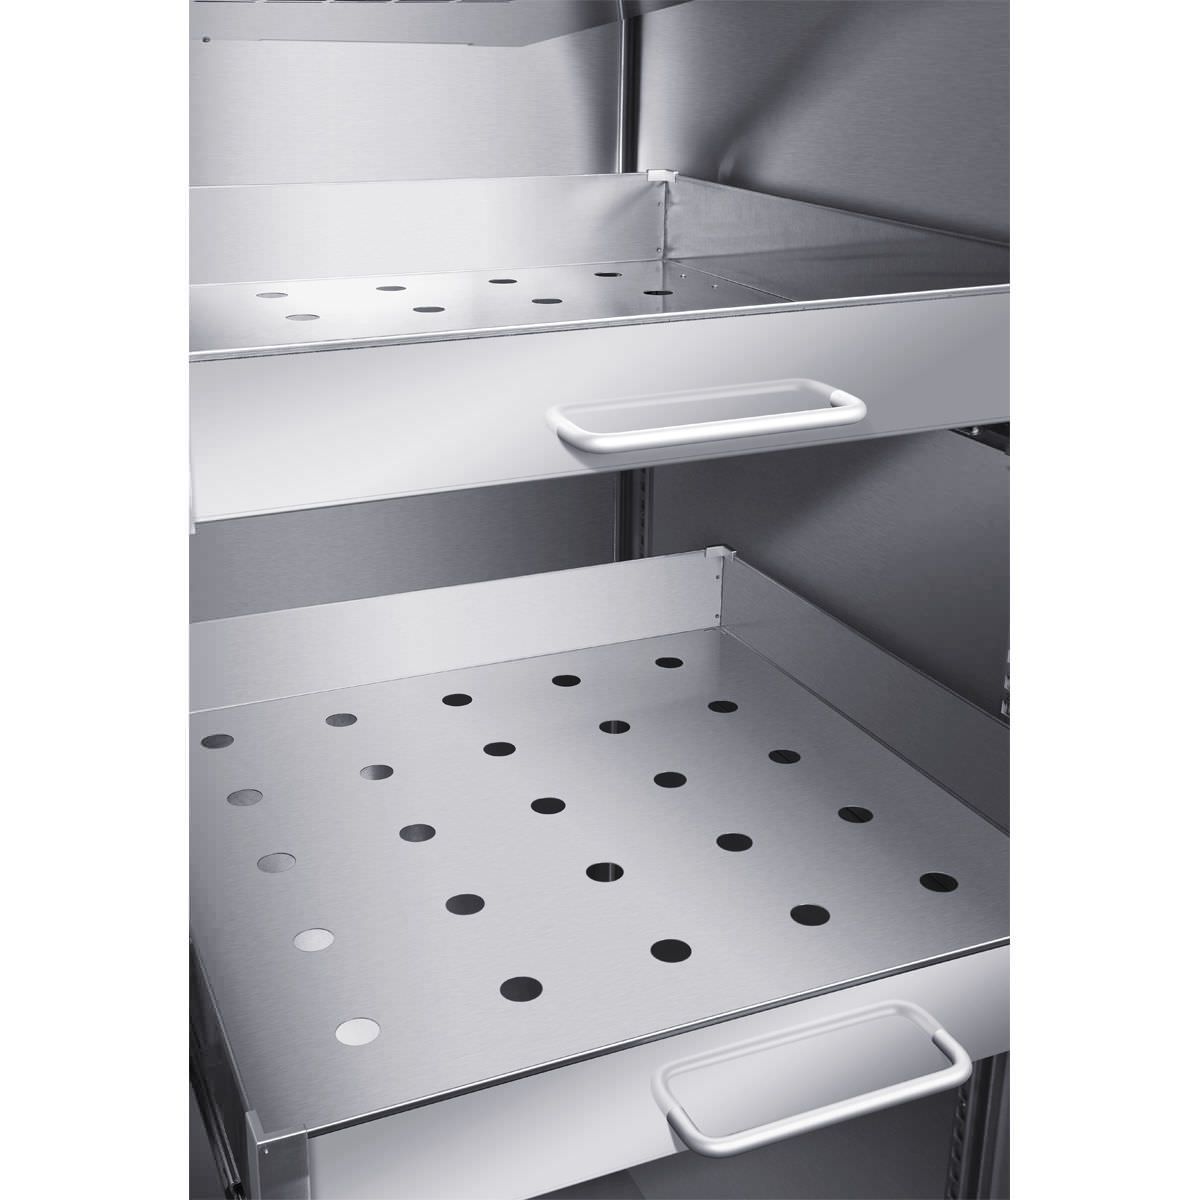 Refrigerator 4 °C , 1308 L | HXC-1308B Haier Medical and Laboratory Products